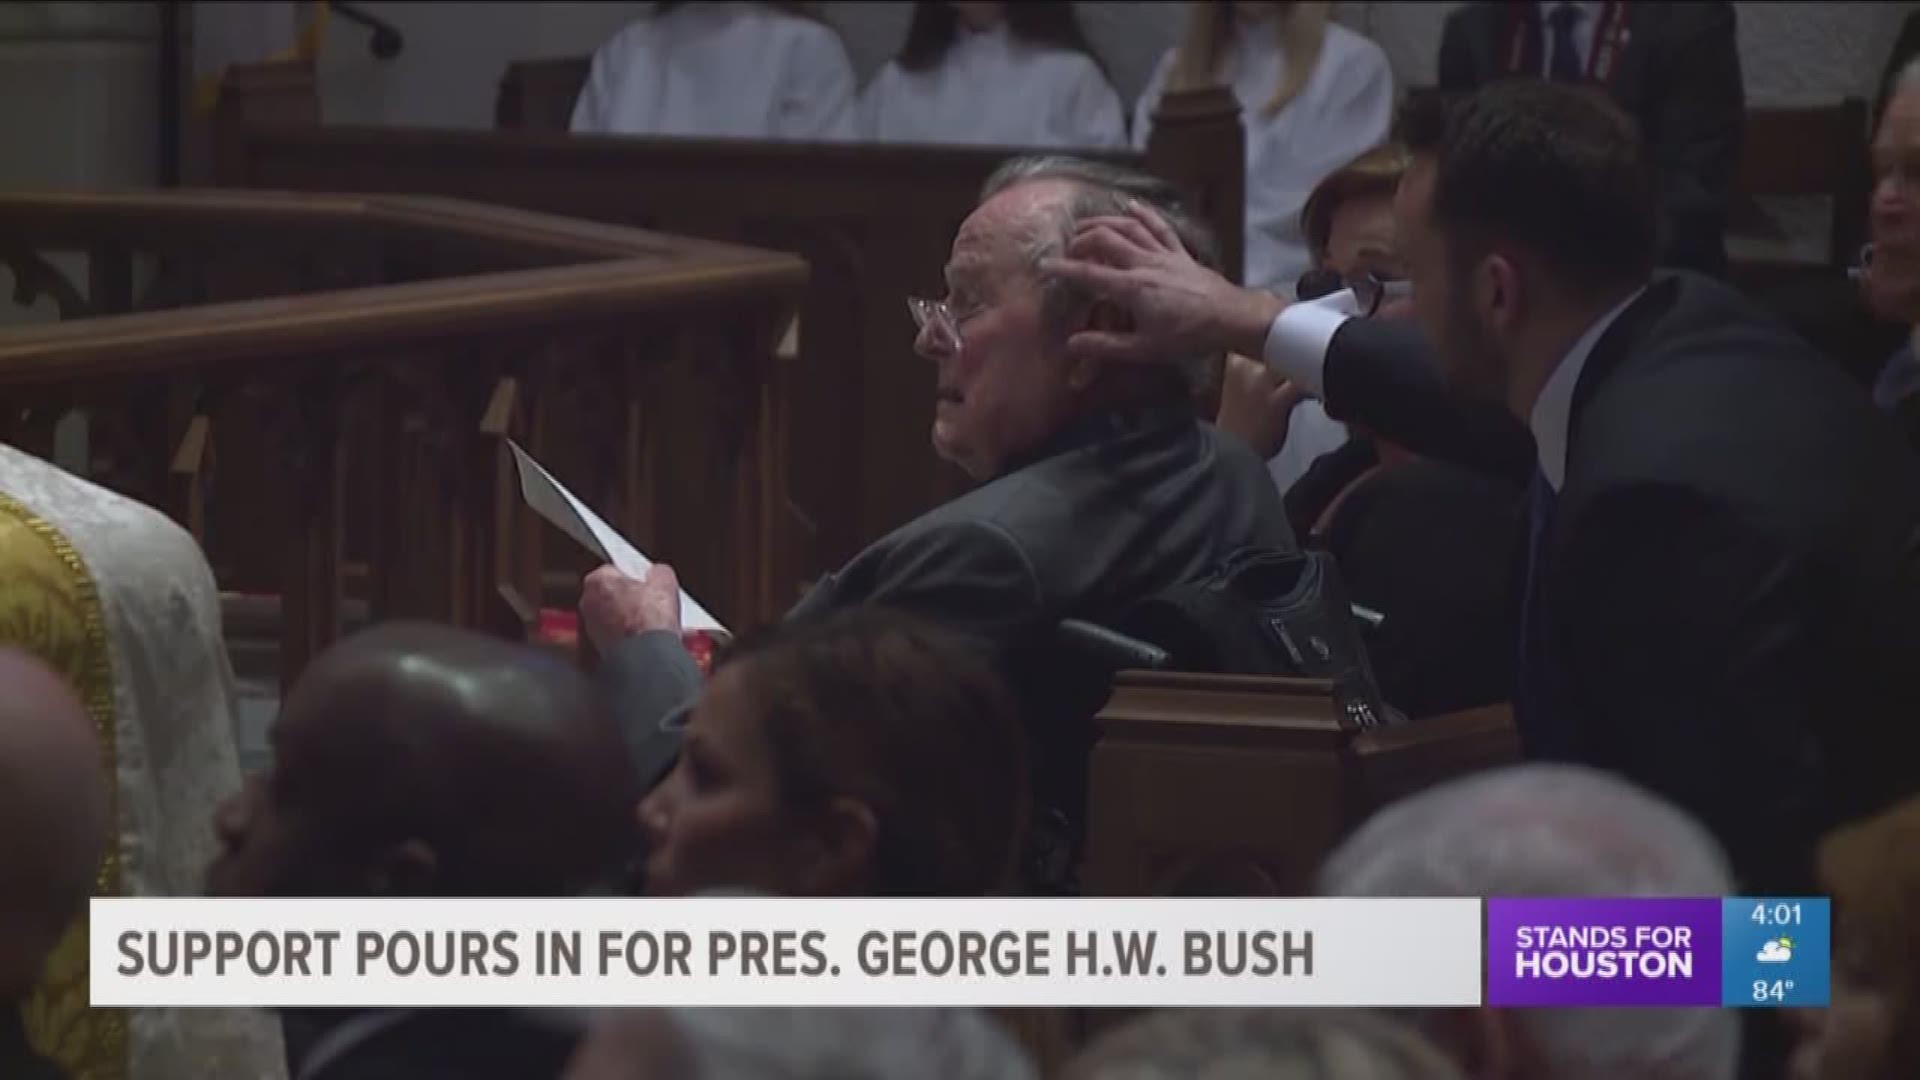 Former president George H.W. Bush remained in Houston Methodist Hospital on Tuesday, two days after he was taken there for an infection.